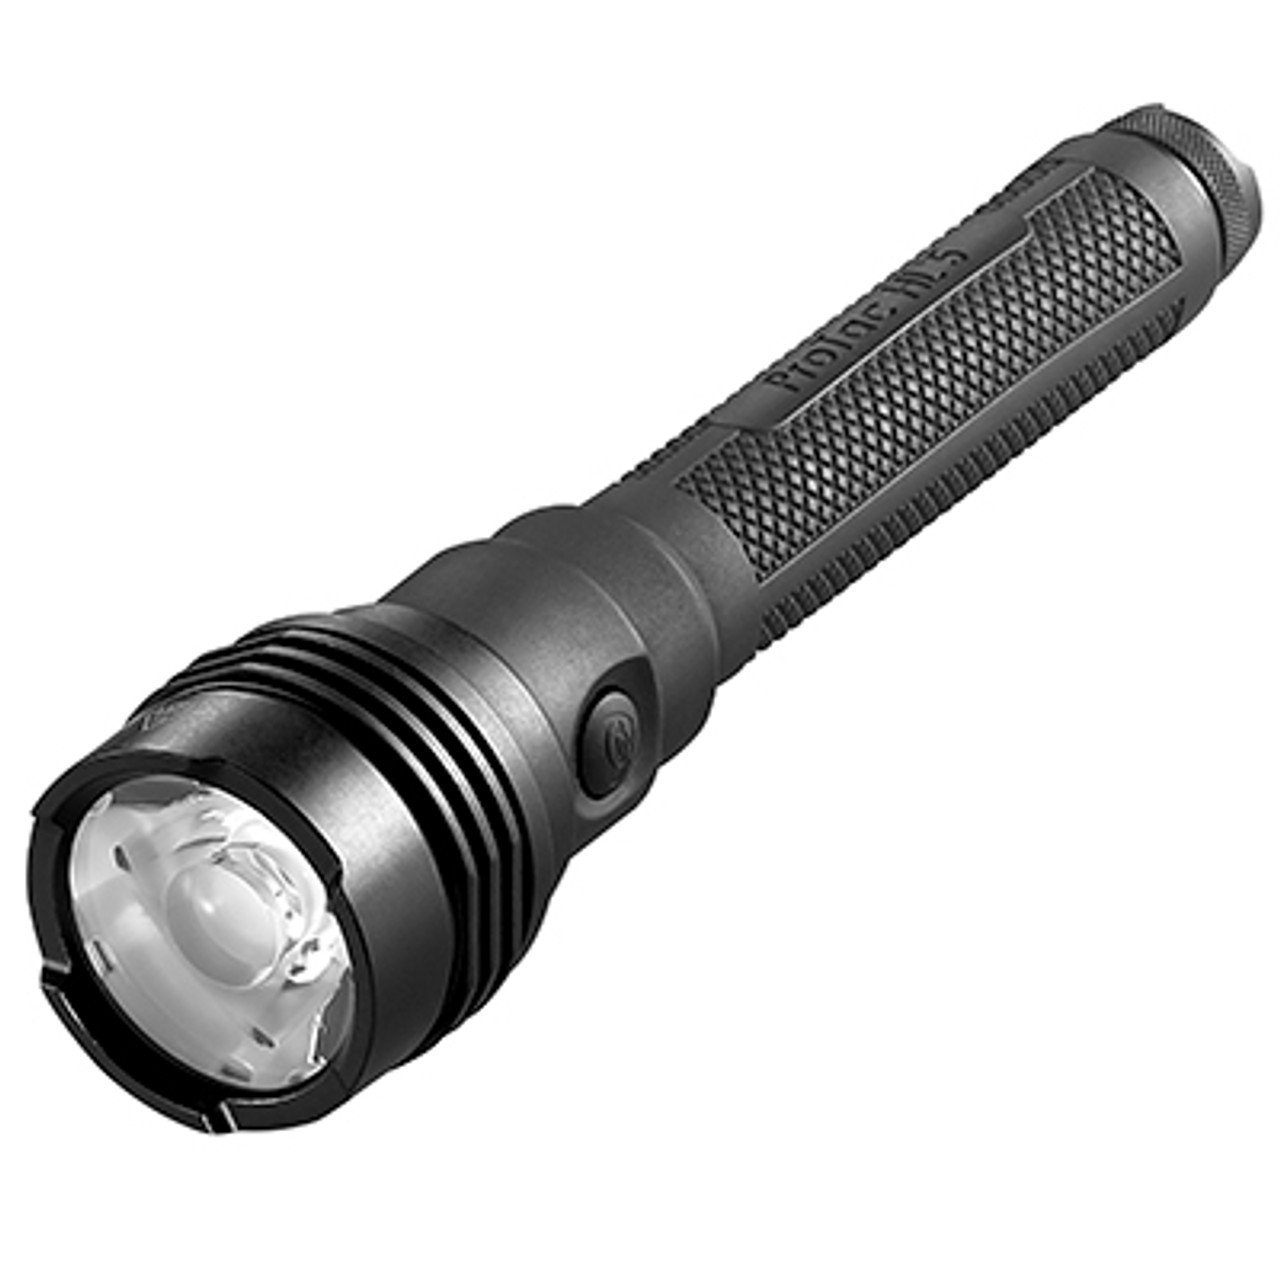 Streamlight 88074 ProTac HL5-X - with 4 CR123A lithium batteries and wrist lanyard - Clam - Black - DSS